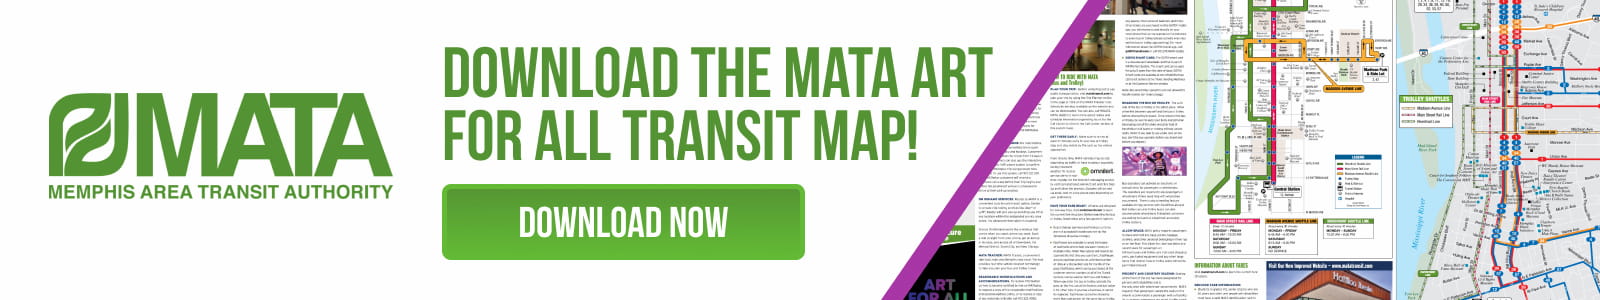 Download the MATA Art For All Transit Map